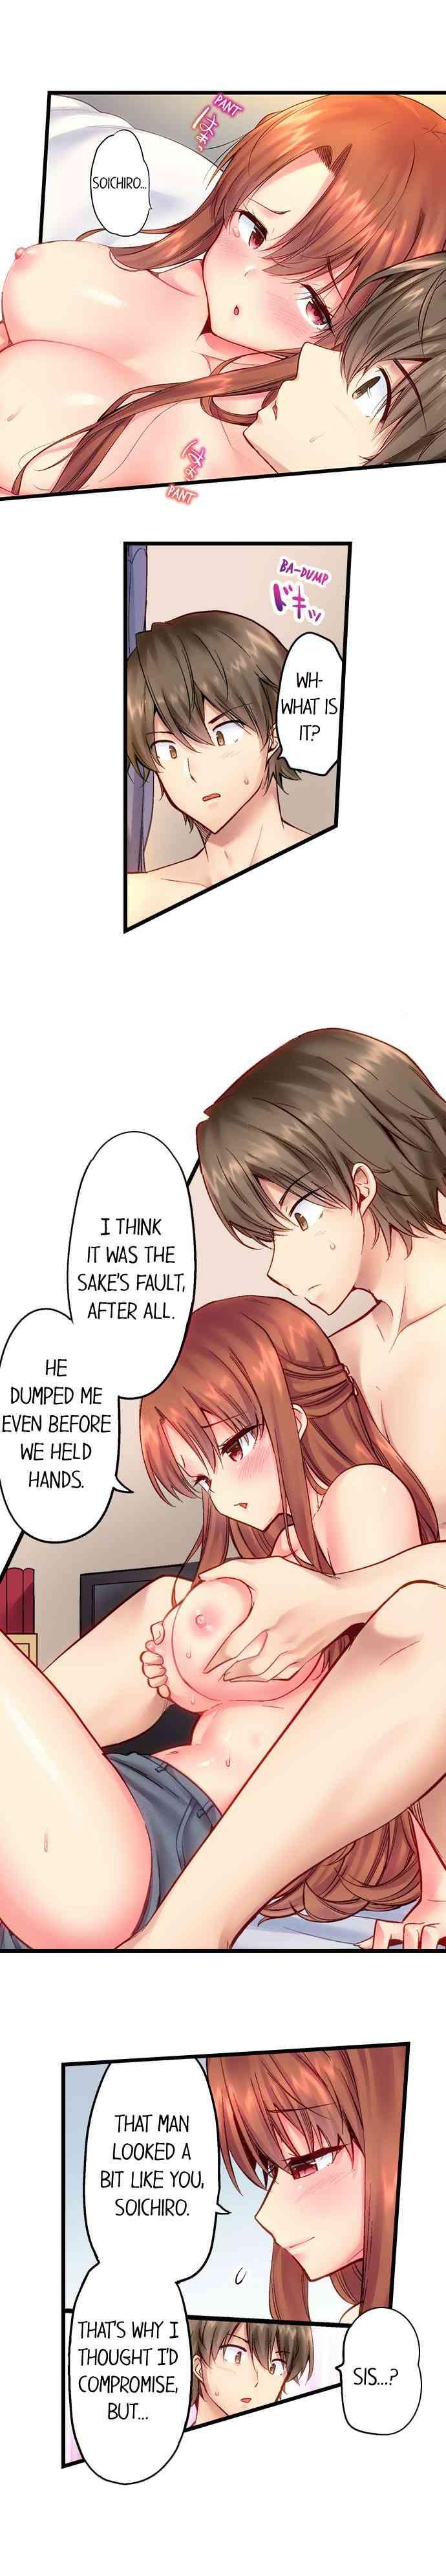 [Yuuki HB] "Hypnotized" Sex with My Brother Ch.21/? [English] [Ongoing] 18